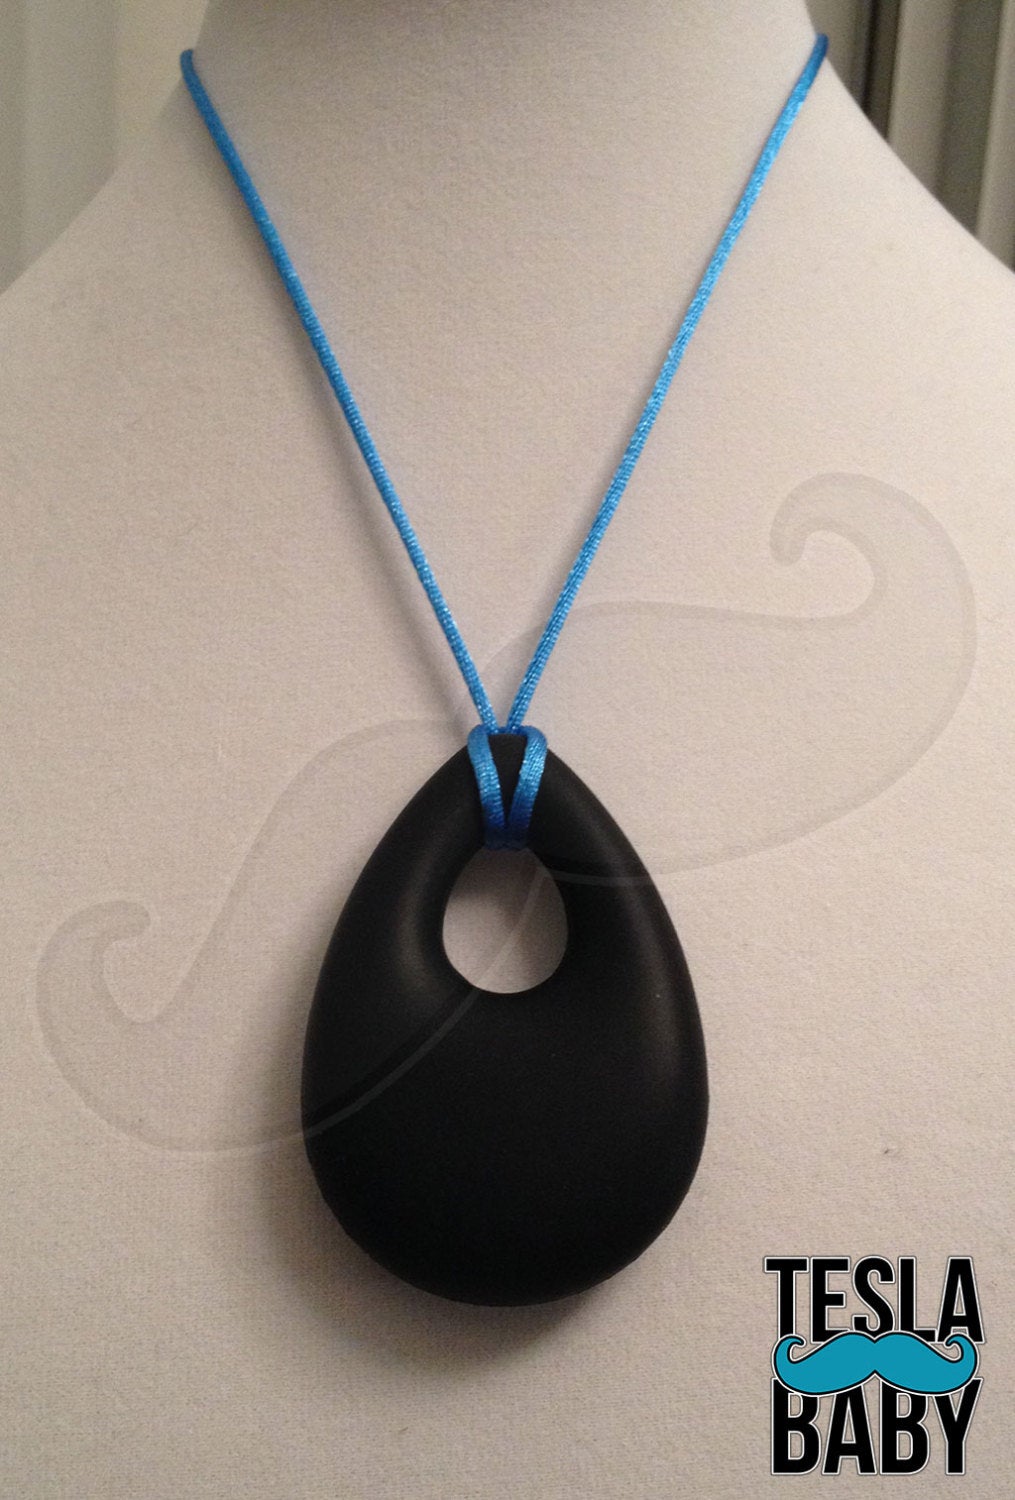 Silicone Pendant Necklace -- 3 7/8" x 2" pink silicone teardrop pendant; for fidgeting, sensory play, teething.